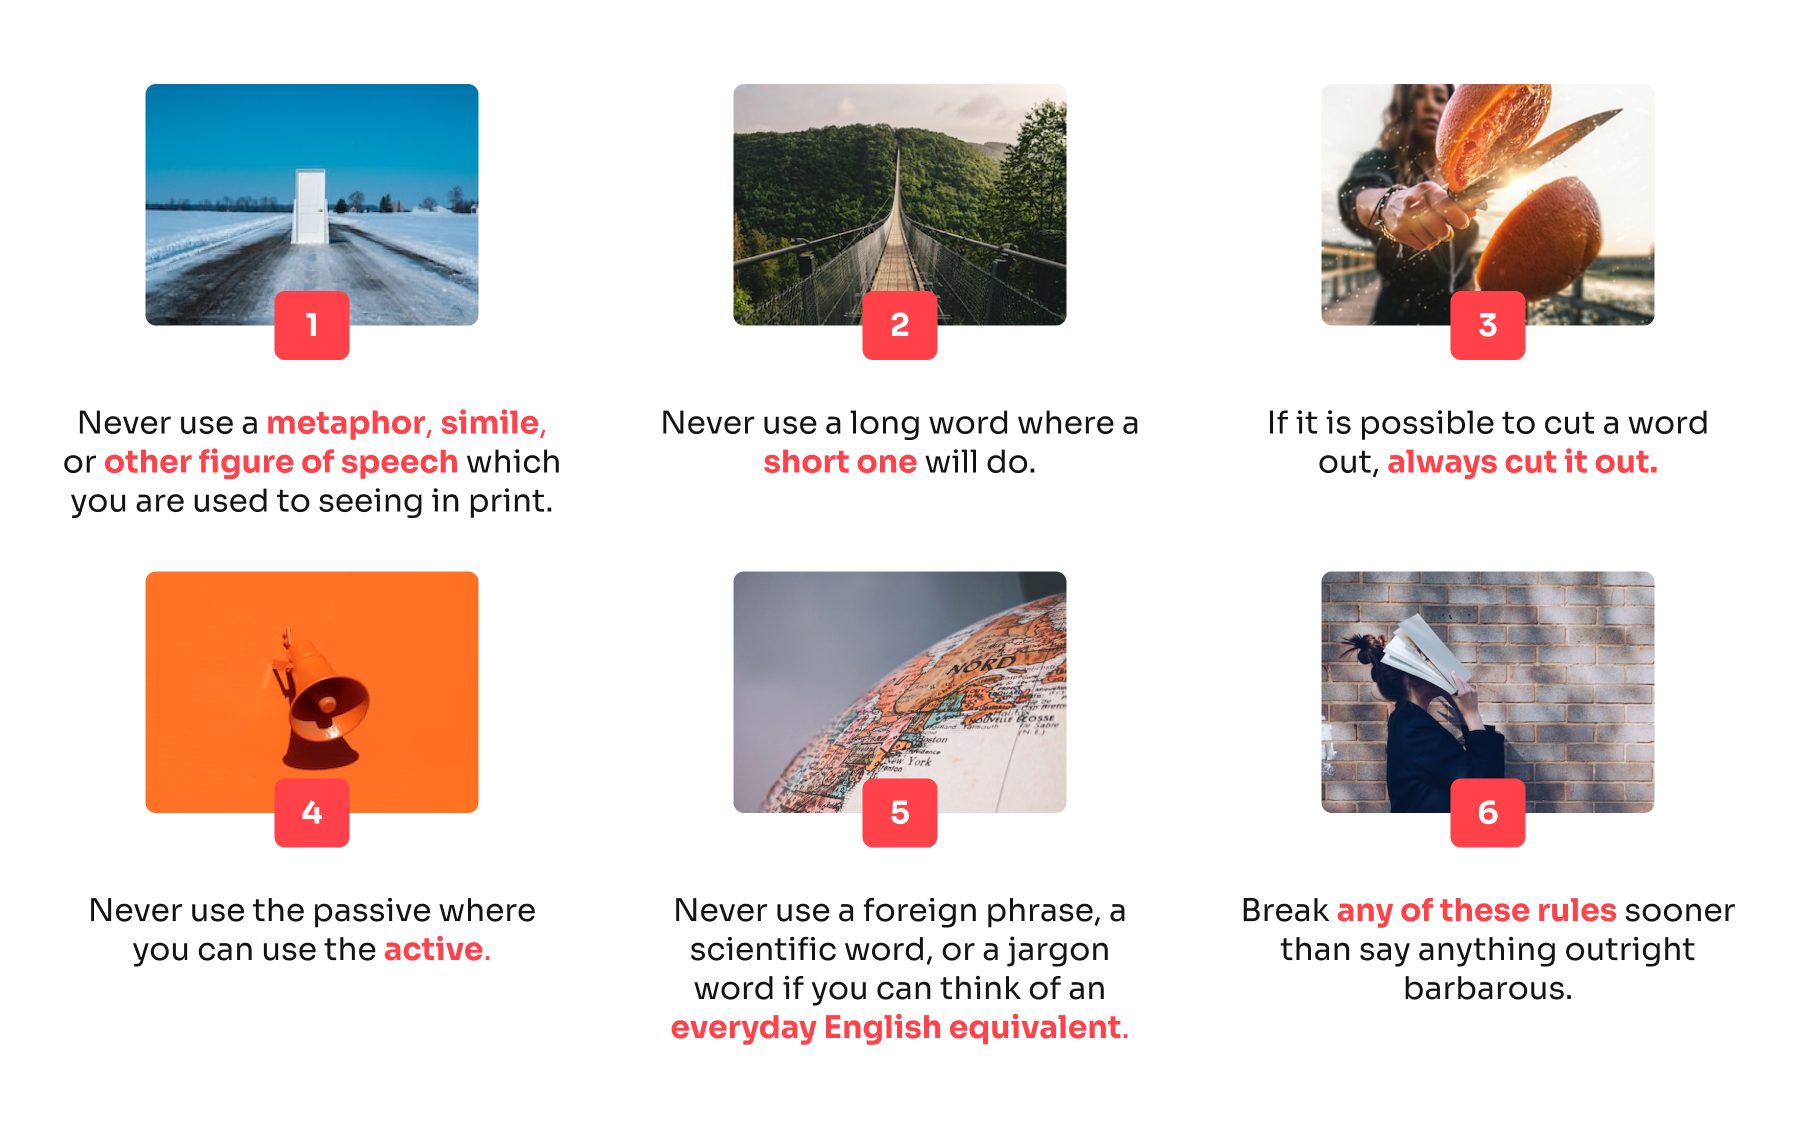 1. Never use a metaphor, simile, or other figure of speech which you are used to seeing in print.
2. Never use a long word where a short one will do.
3. If it is possible to cut a word out, always cut it out.
4. Never use the passive where you can use the active.
5. Never use a foreign phrase, a scientific word, or a jargon word if you can think of an everyday English equivalent.
6. Break any of these rules sooner than say anything outright barbarous.